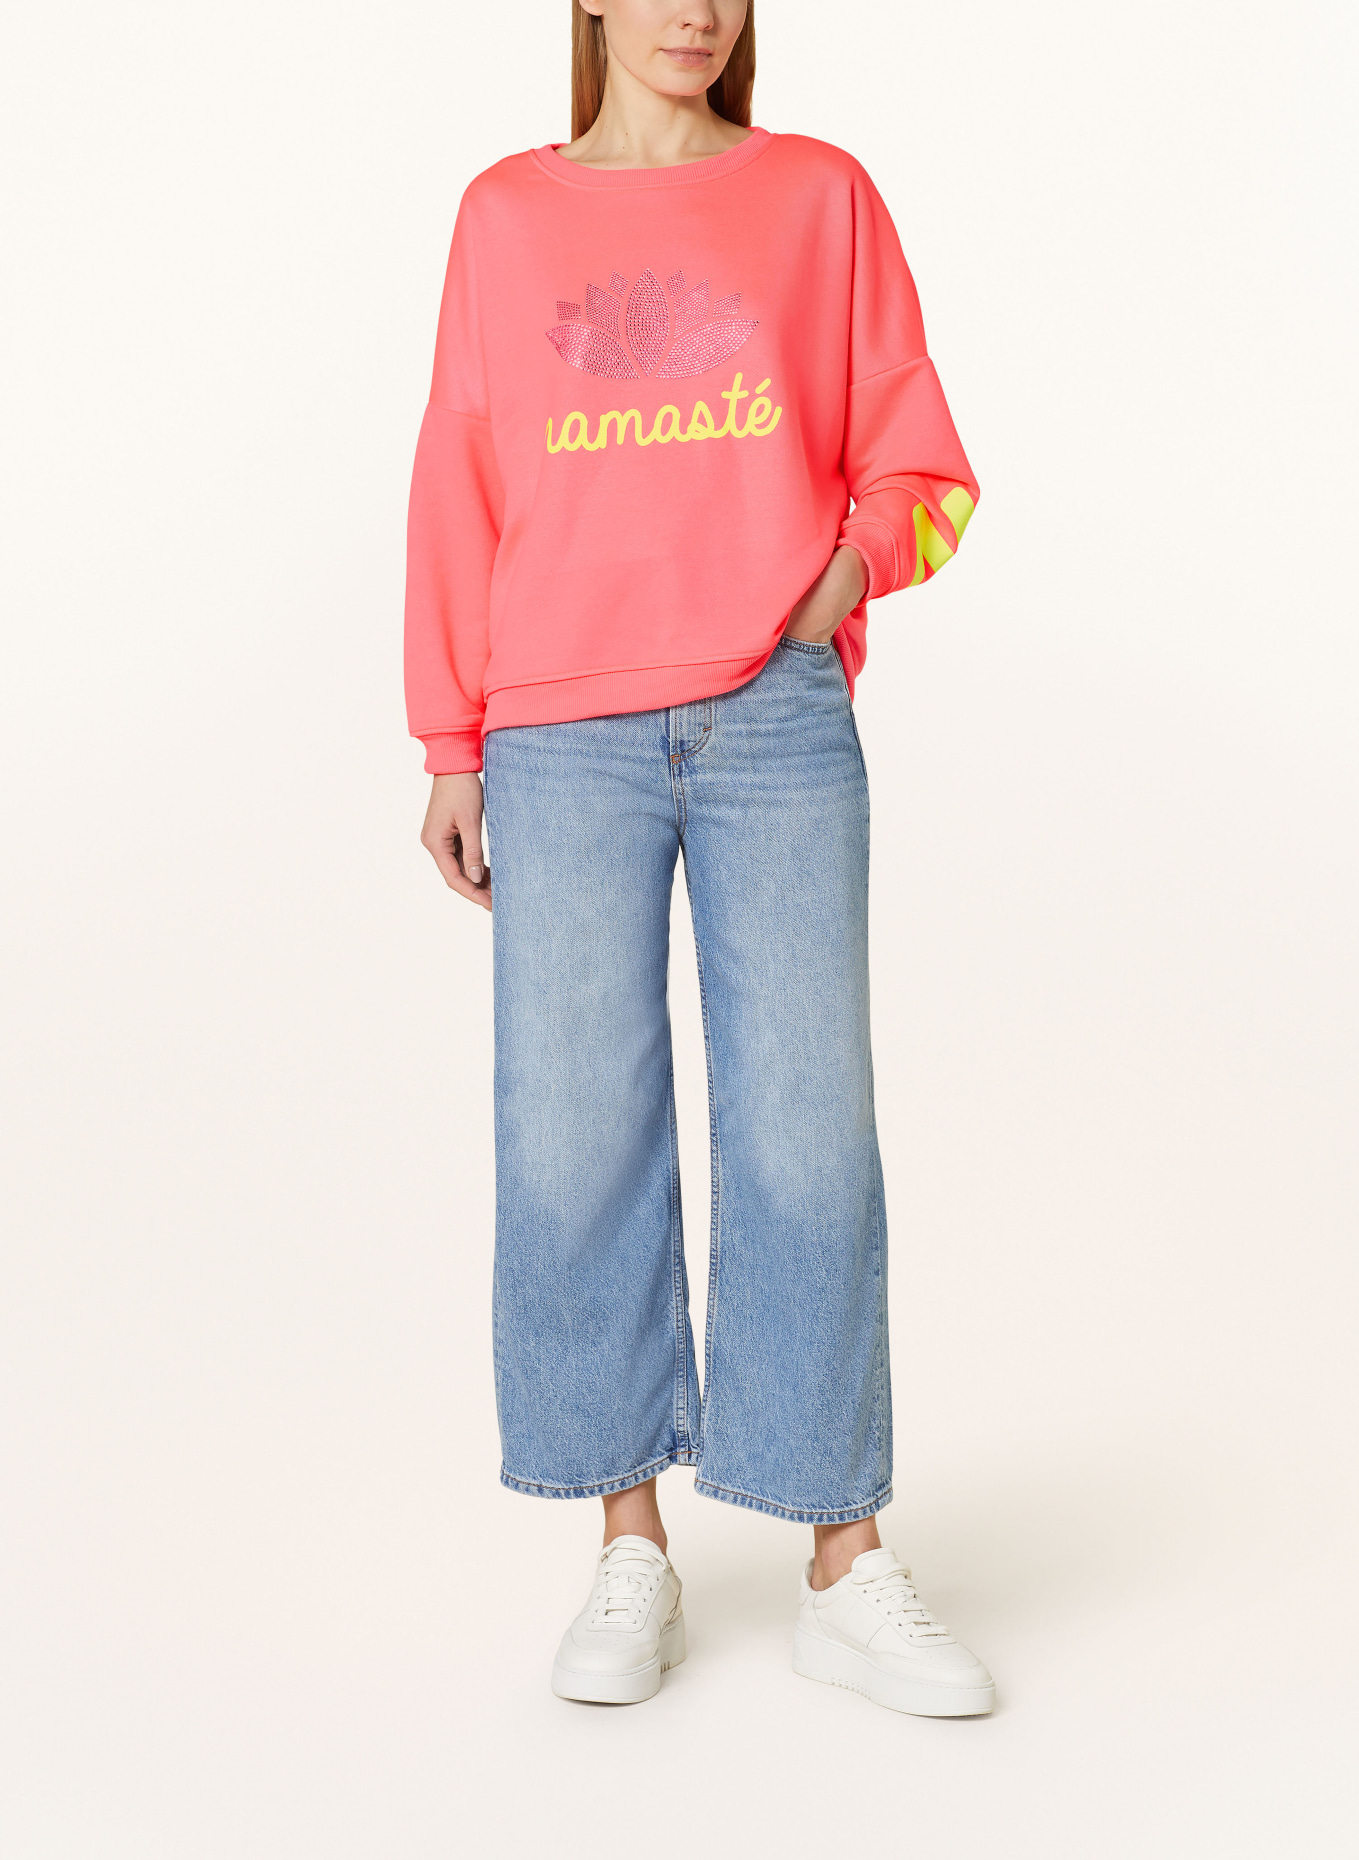 miss goodlife Sweatshirt with decorative gems, Color: NEON PINK/ NEON YELLOW (Image 2)